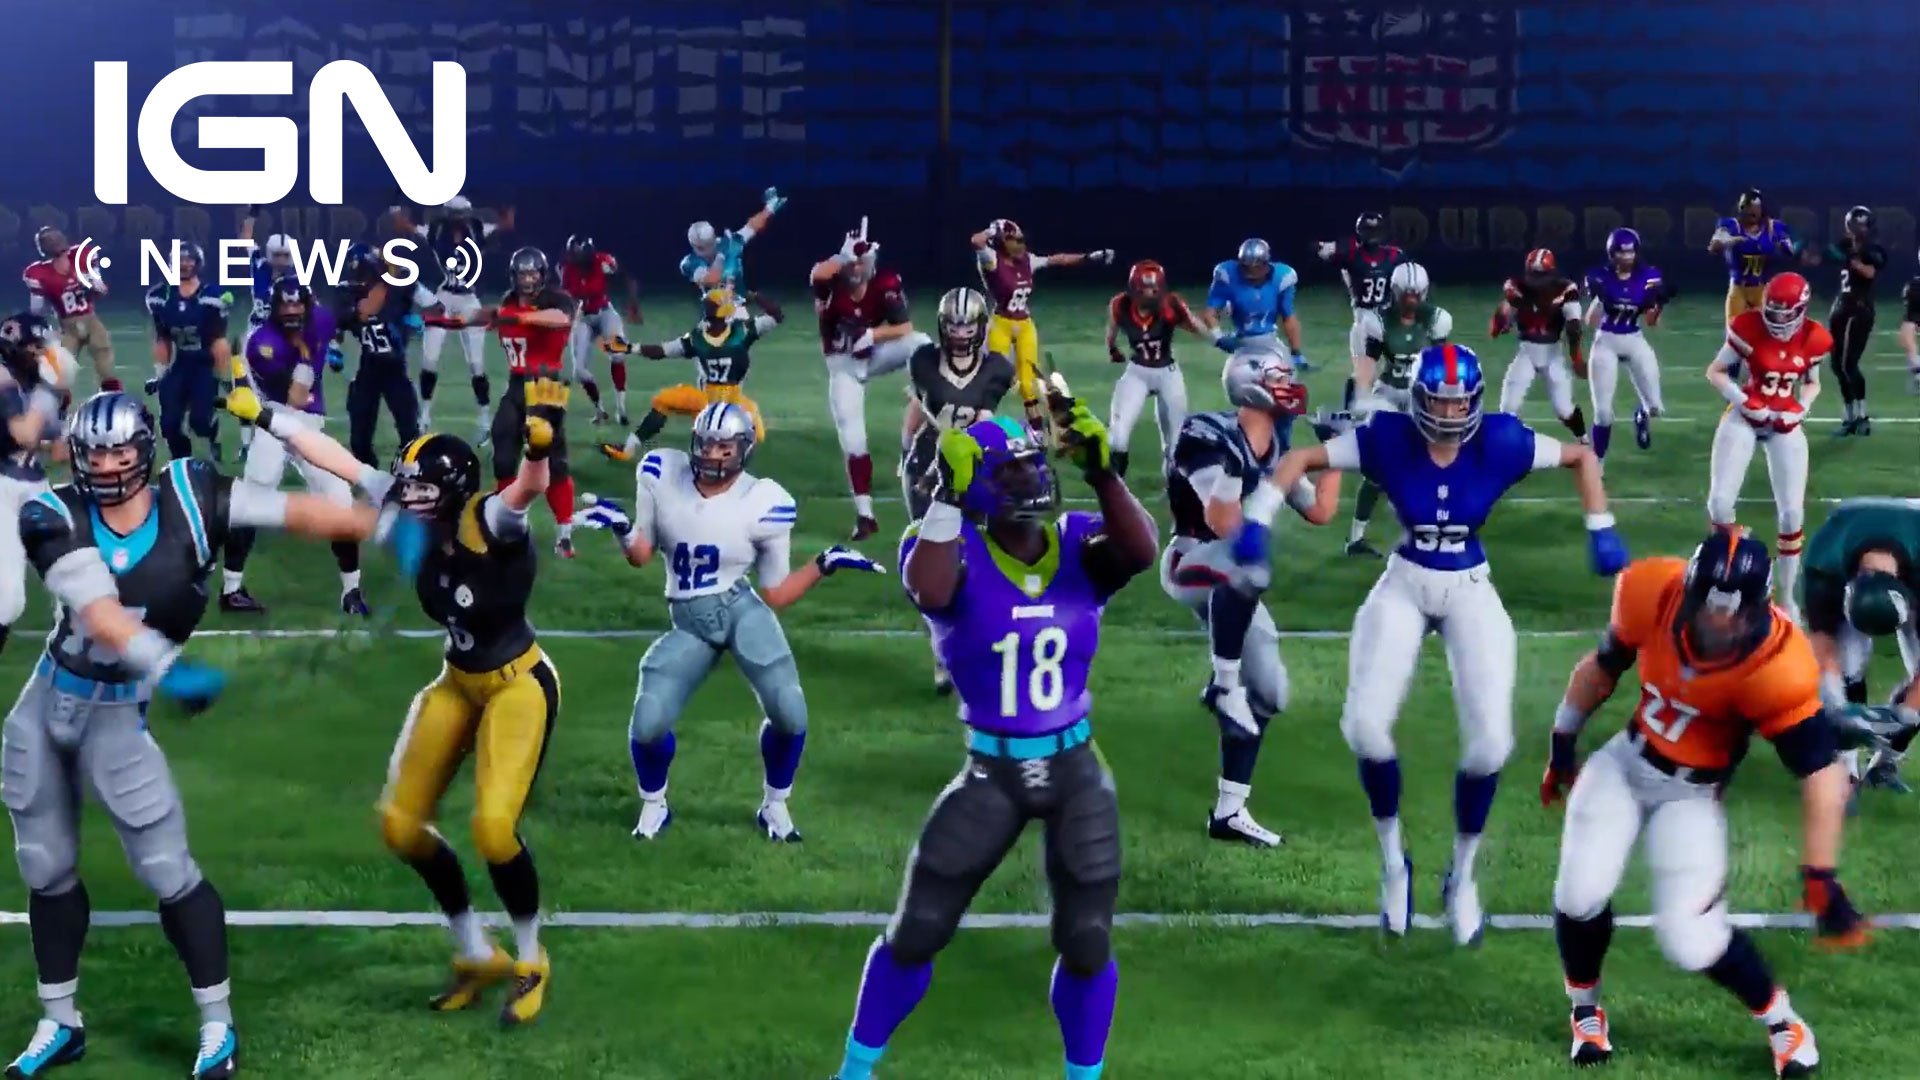 Fortnite and NFL Partner to Bring Team Uniforms to the Game   IGN